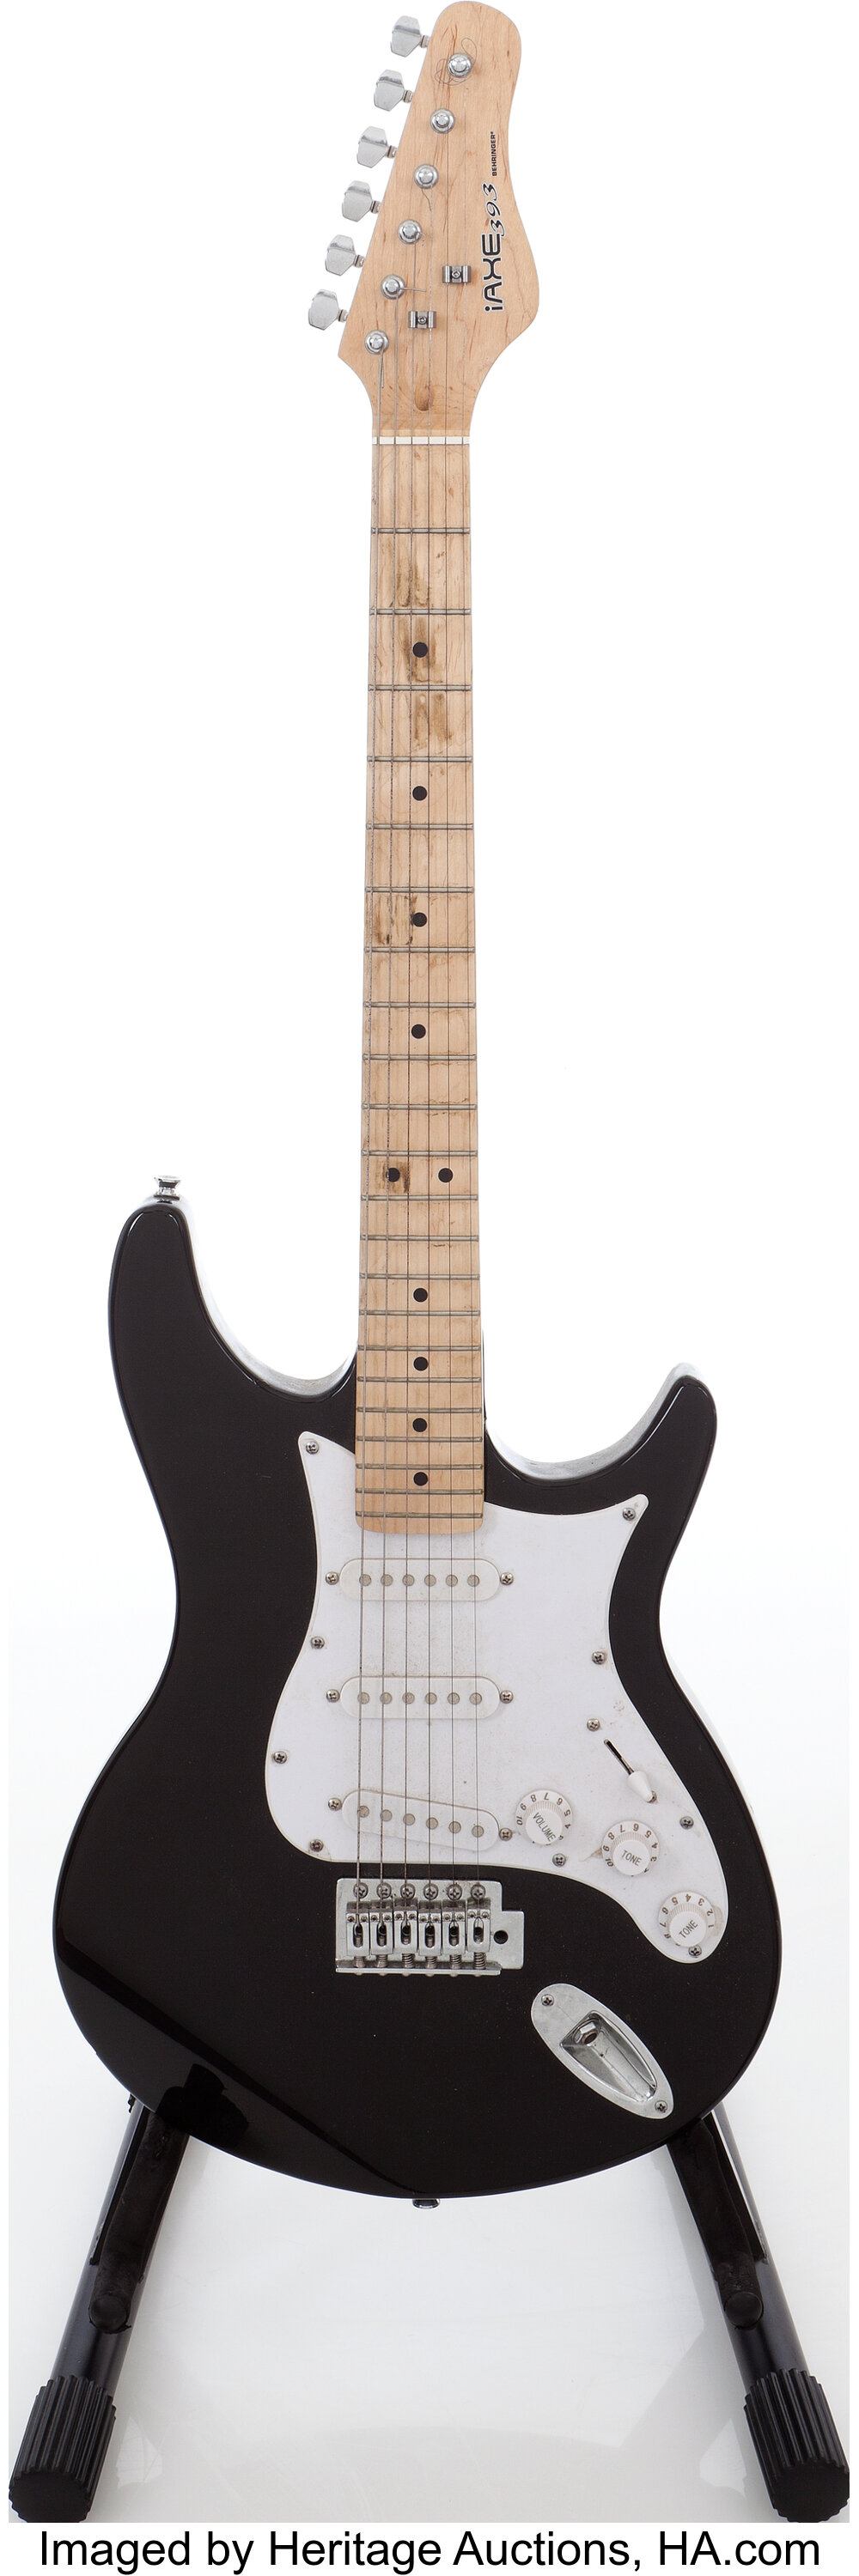 2006 Behringer IAXE393 Black Solid Body Electric Guitar, # | Lot #81013 | Heritage Auctions